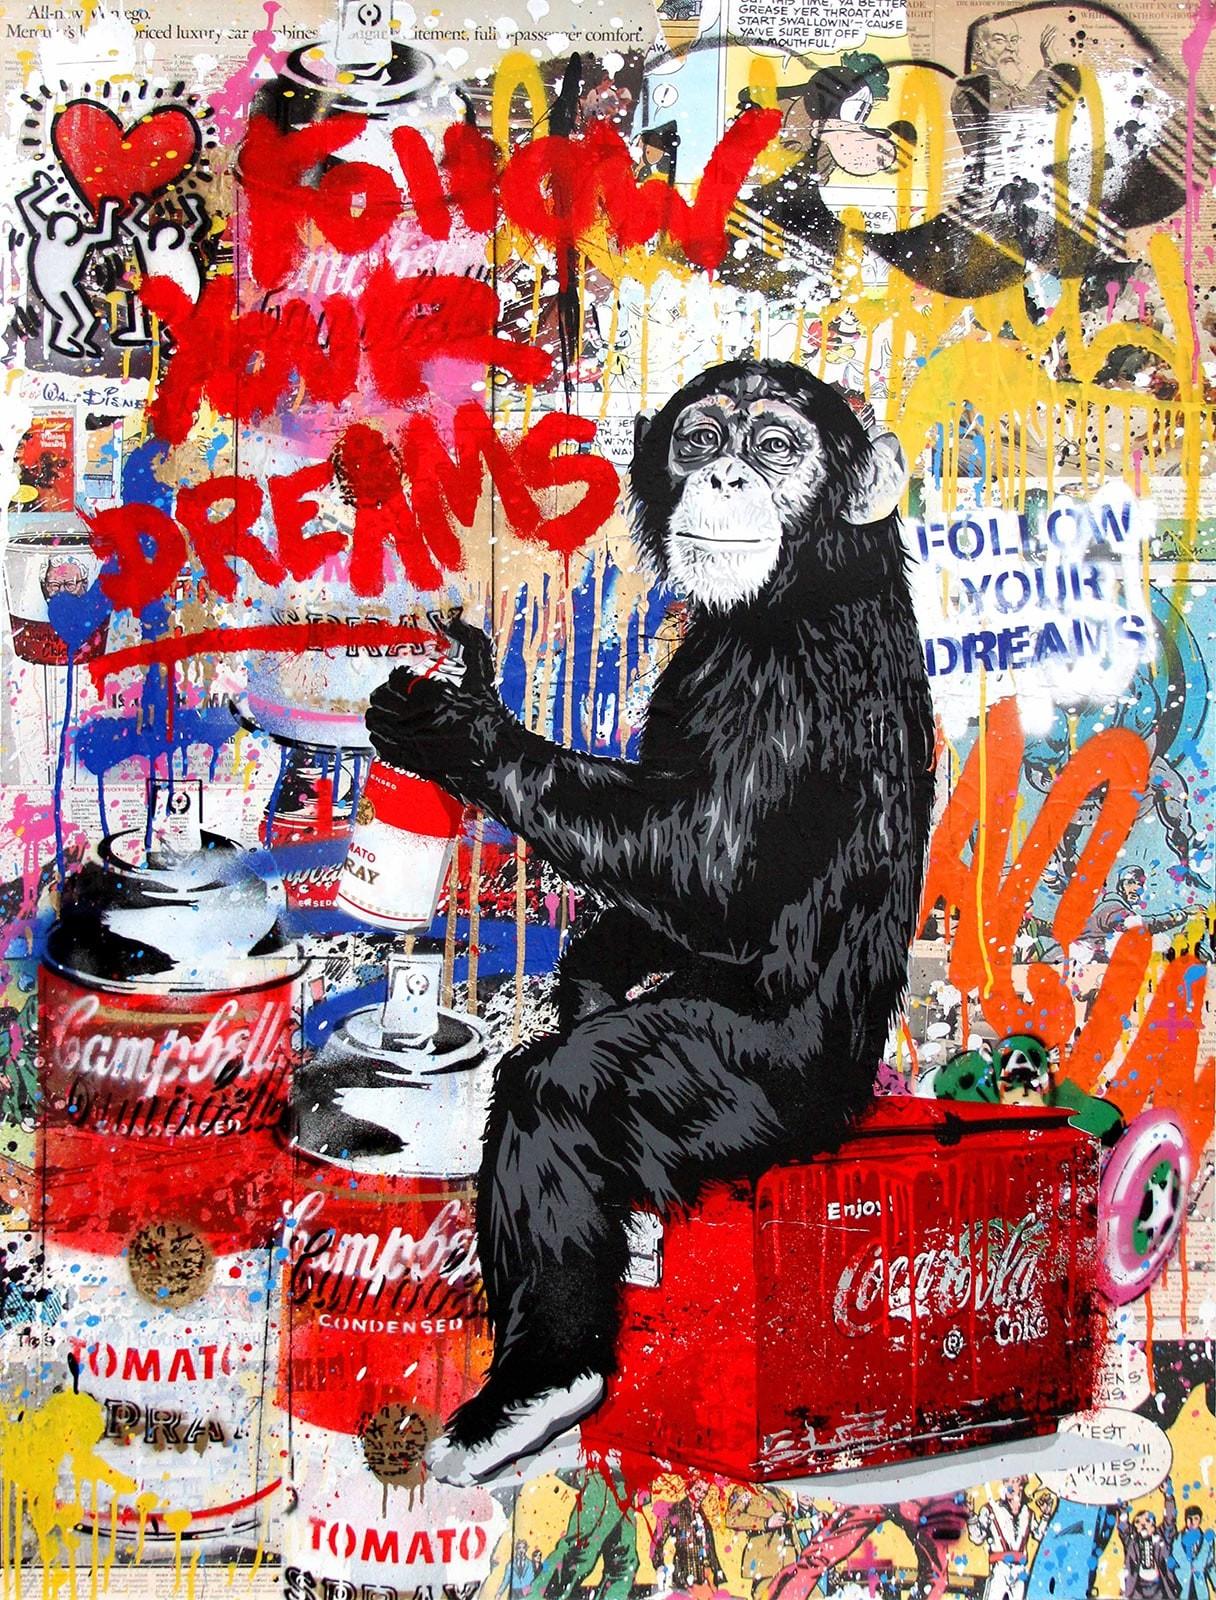 Every Day Life Follow Your Dreams - Mixed Media Art by Mr. Brainwash